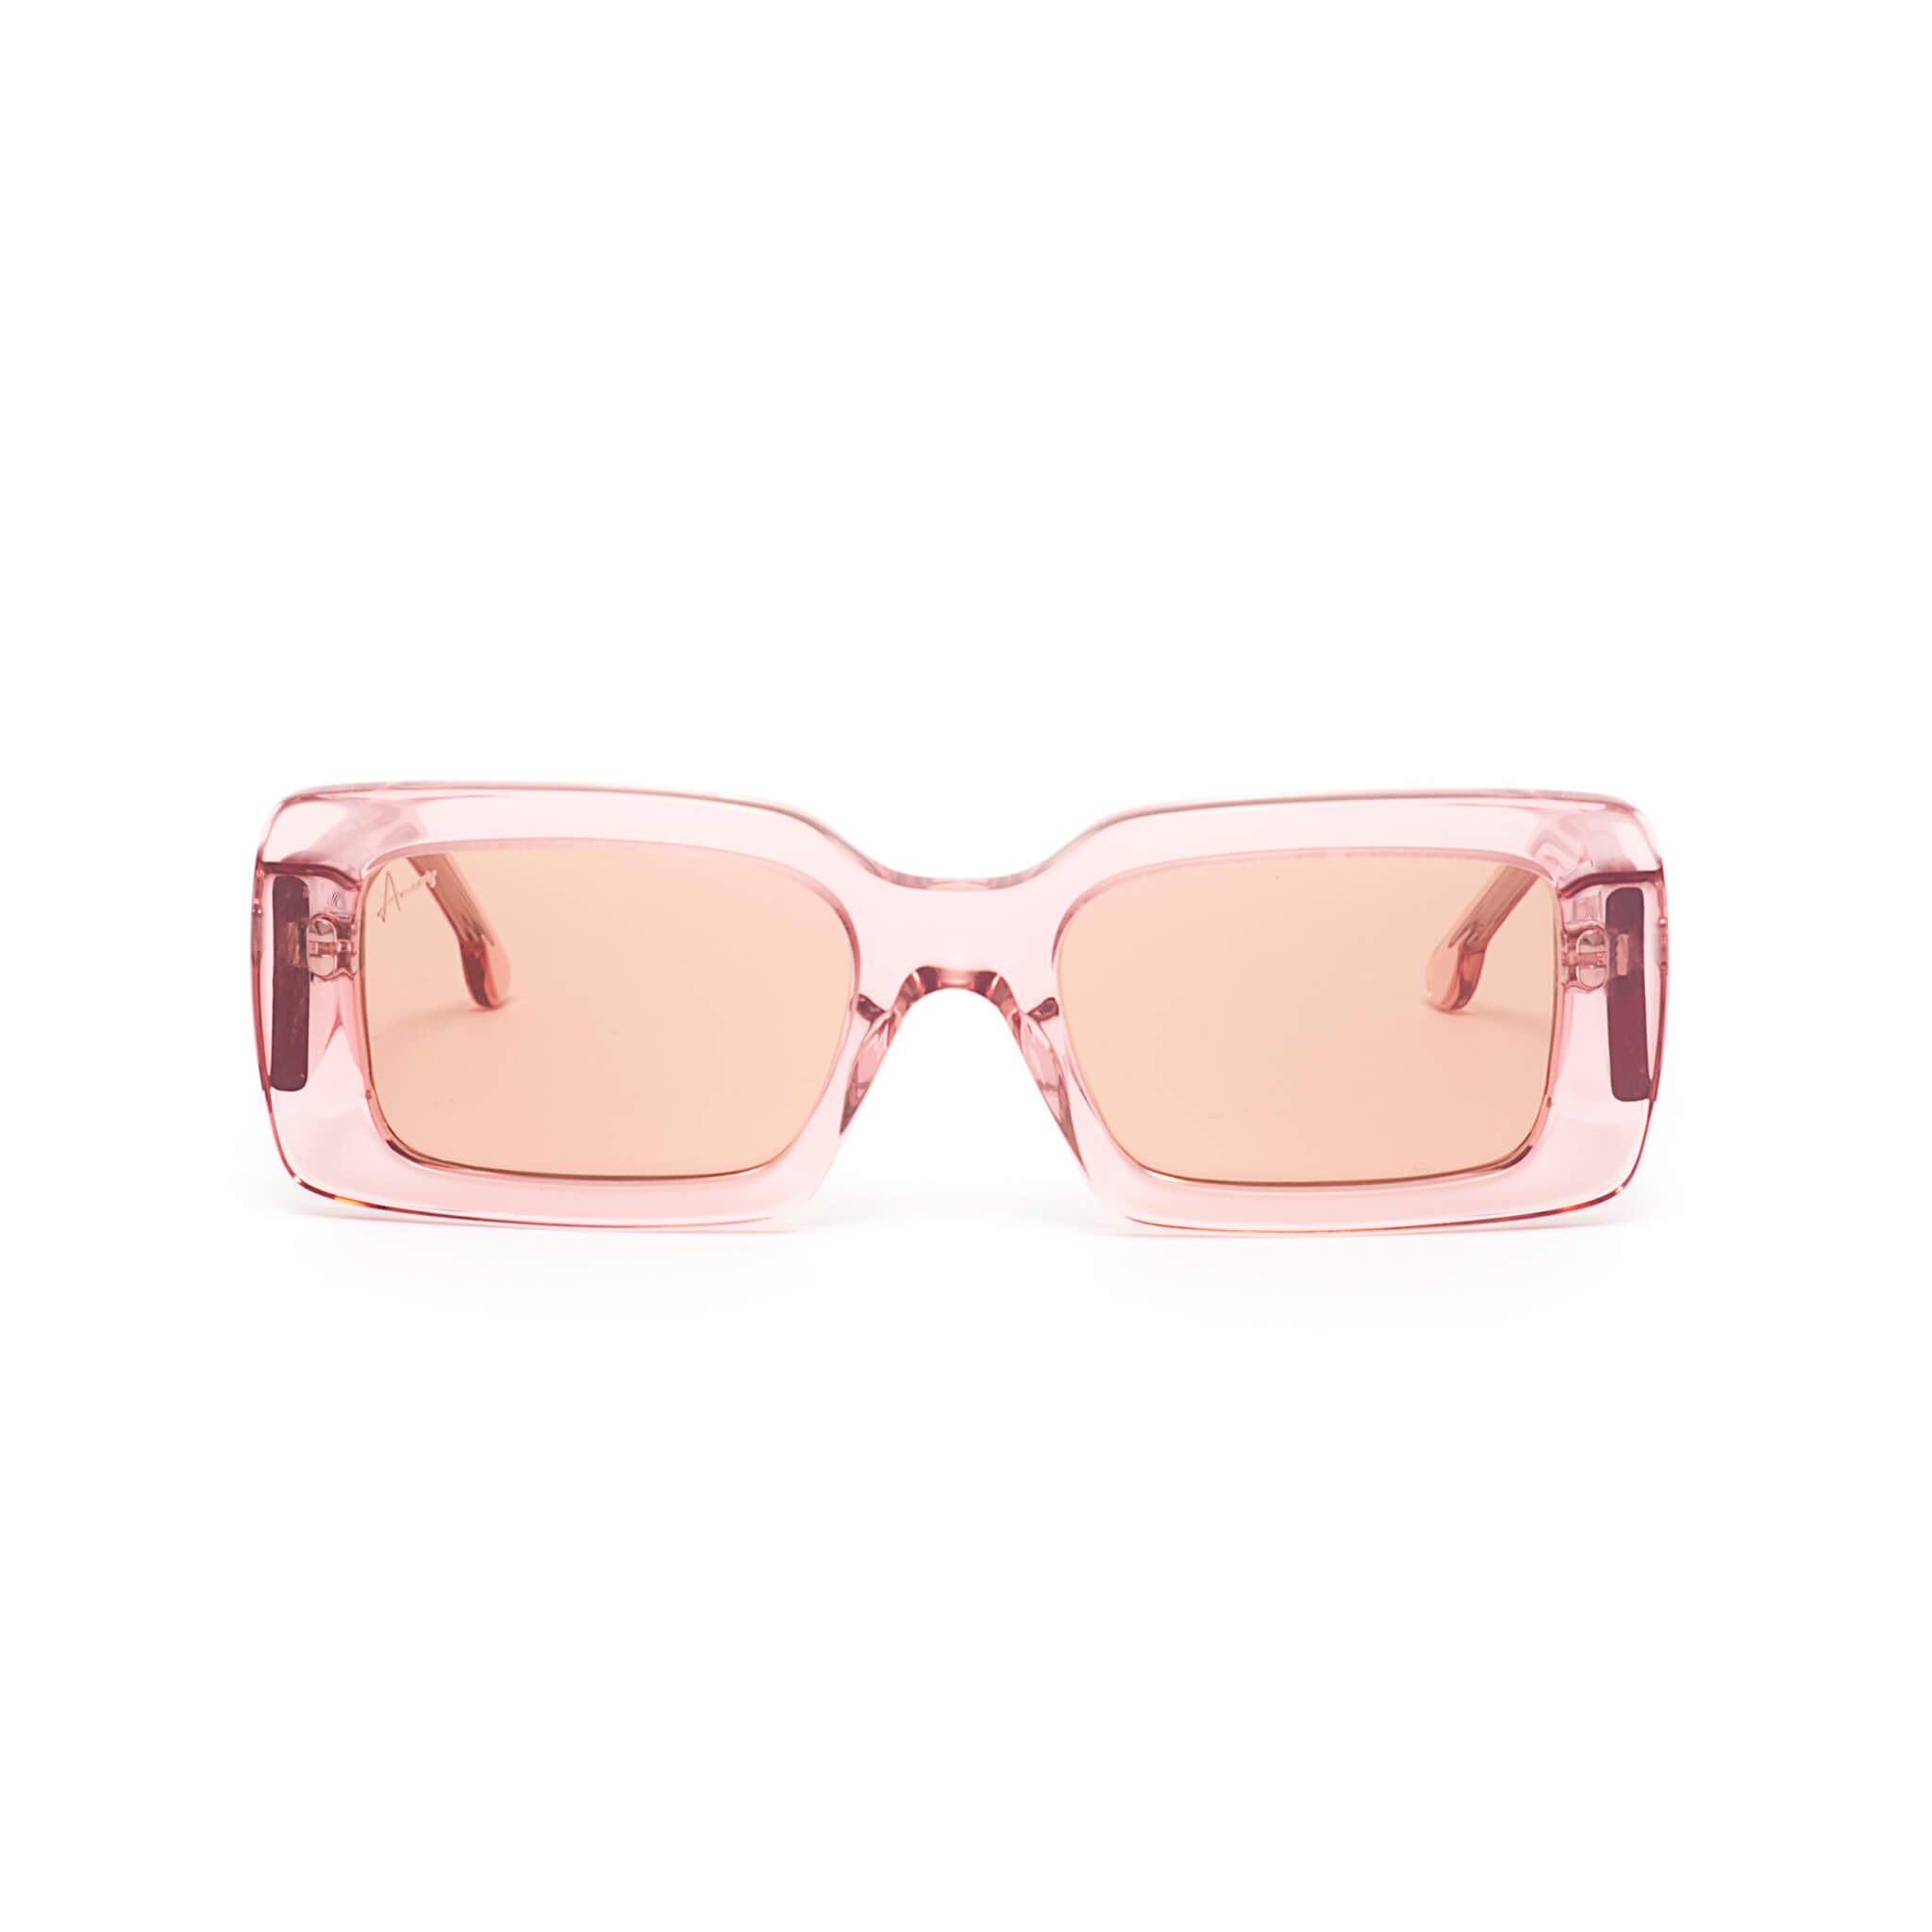 Rose frames sunglasses with brown lenses